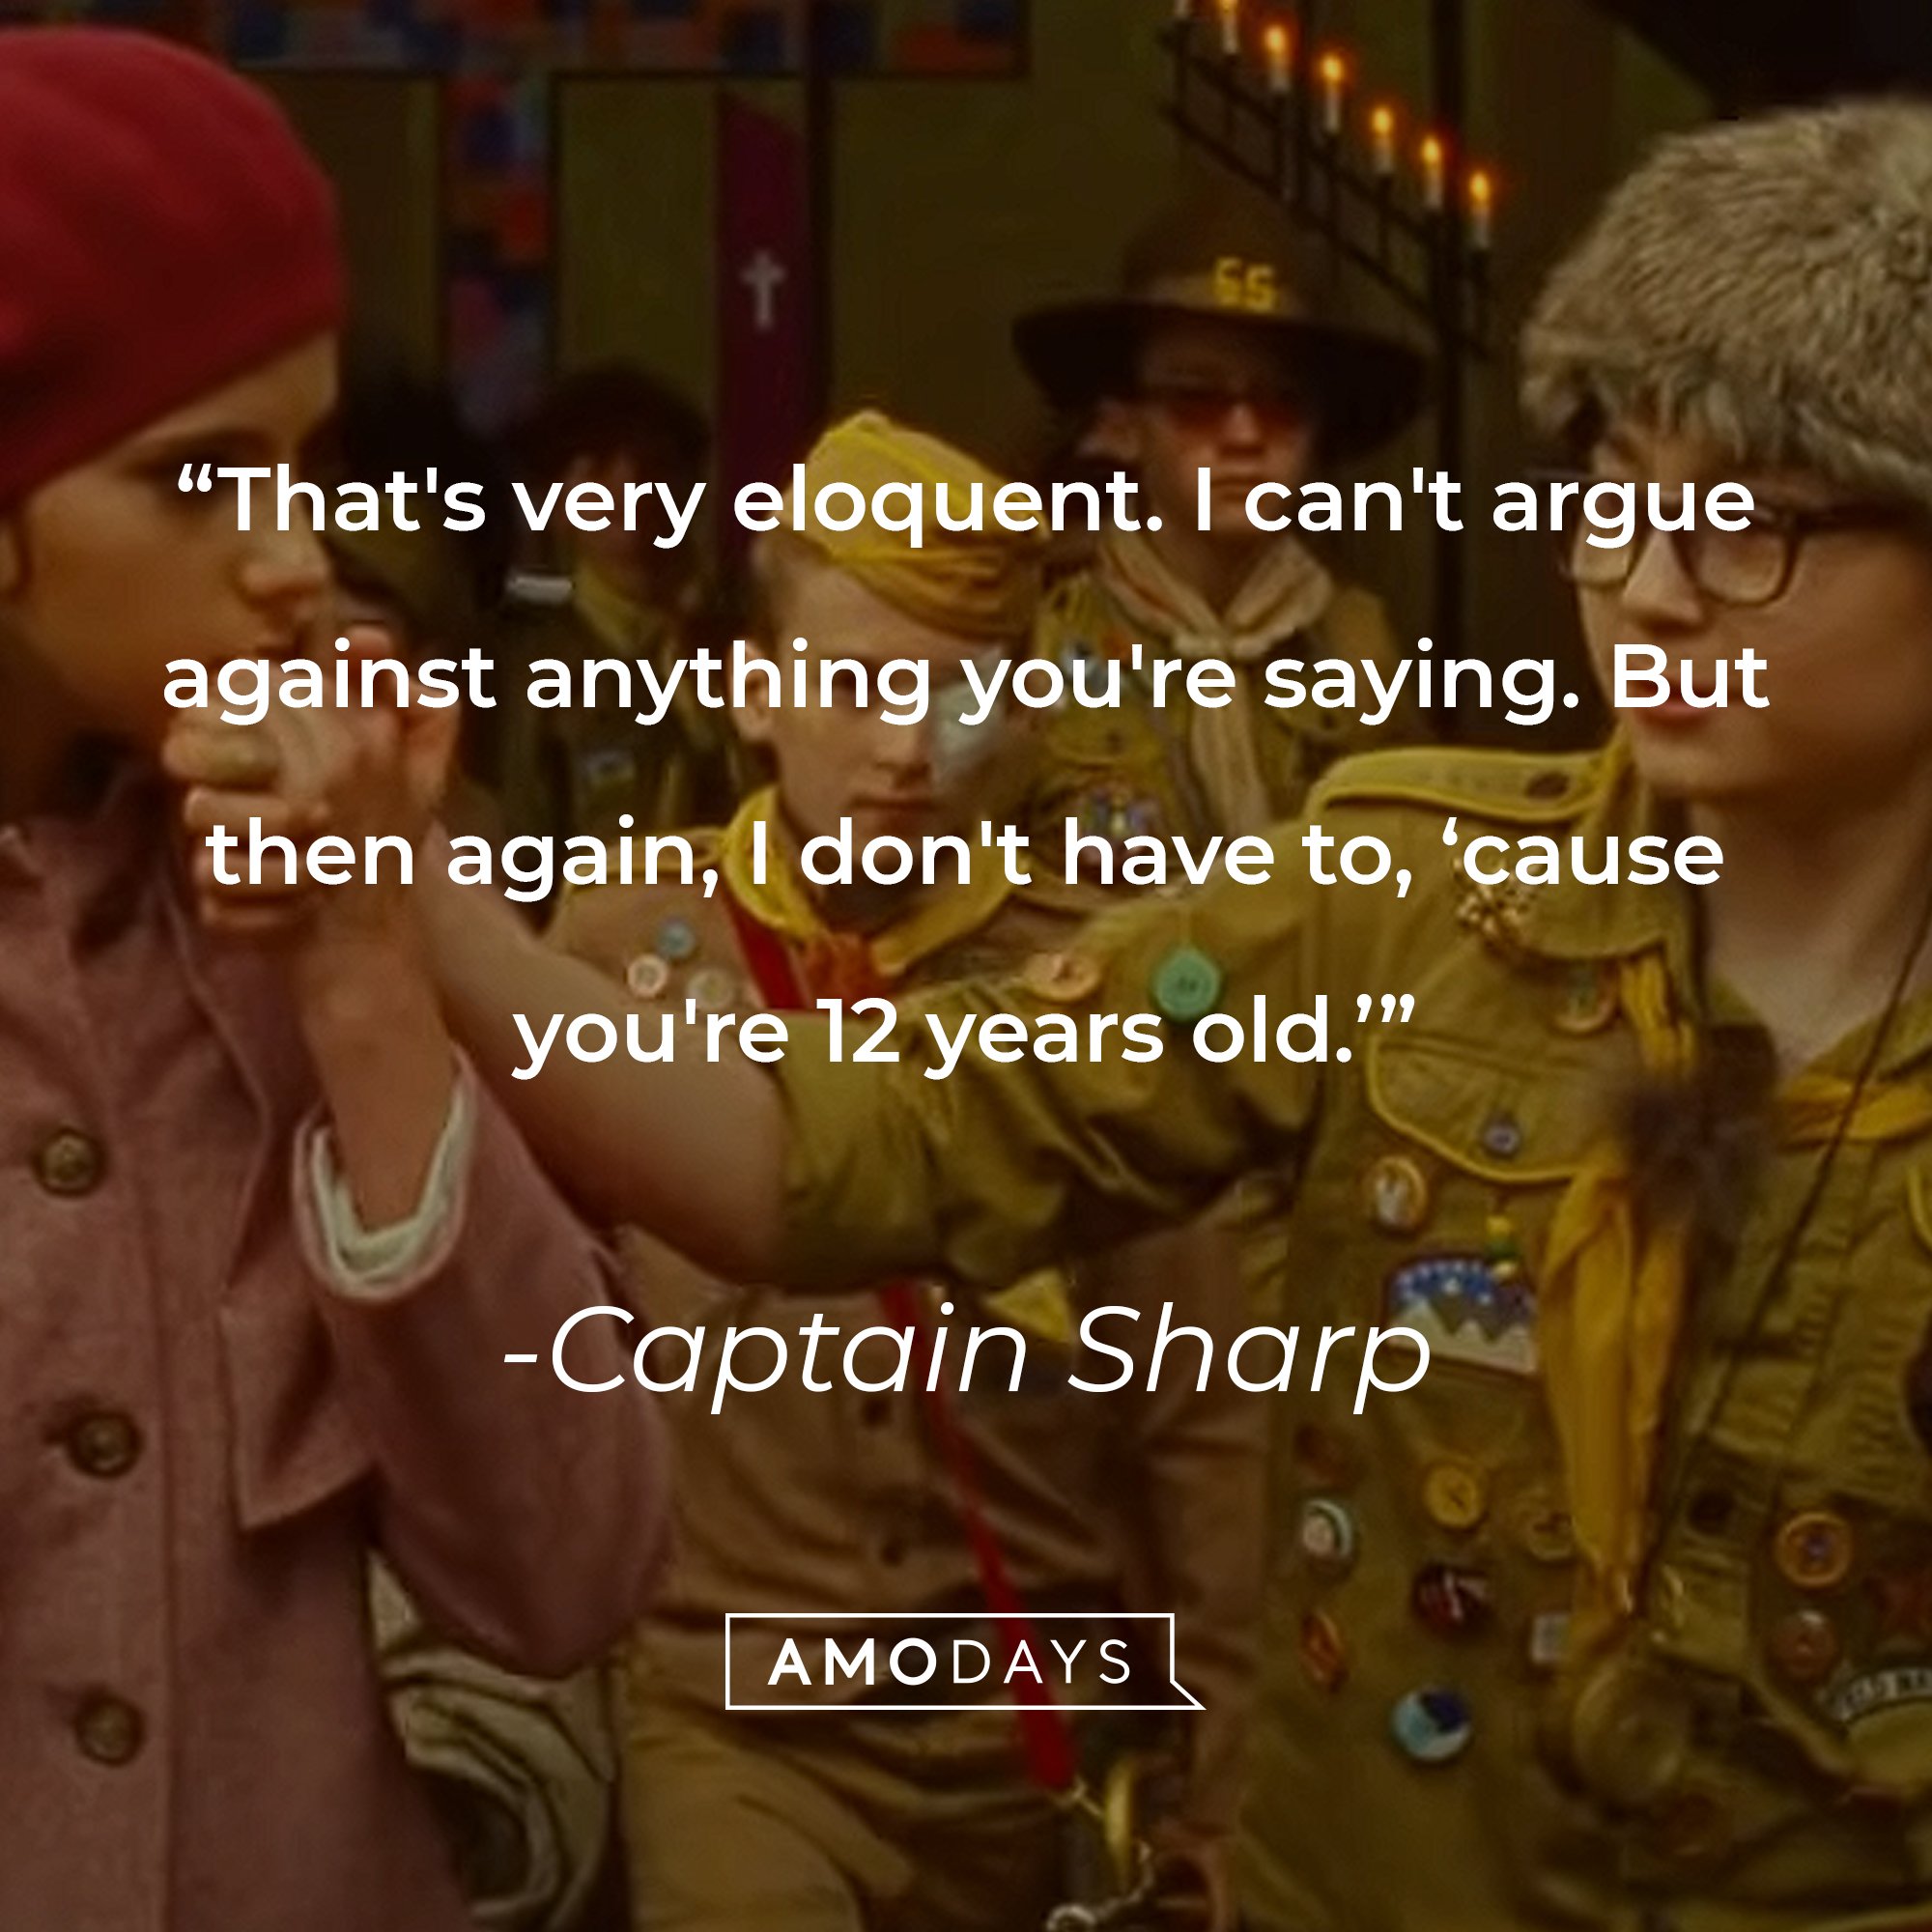 Captain Sharp's quote: "That's very eloquent. I can't argue against anything you're saying. But then again, I don't have to 'cause you're 12 years old." | Image: AmoDays